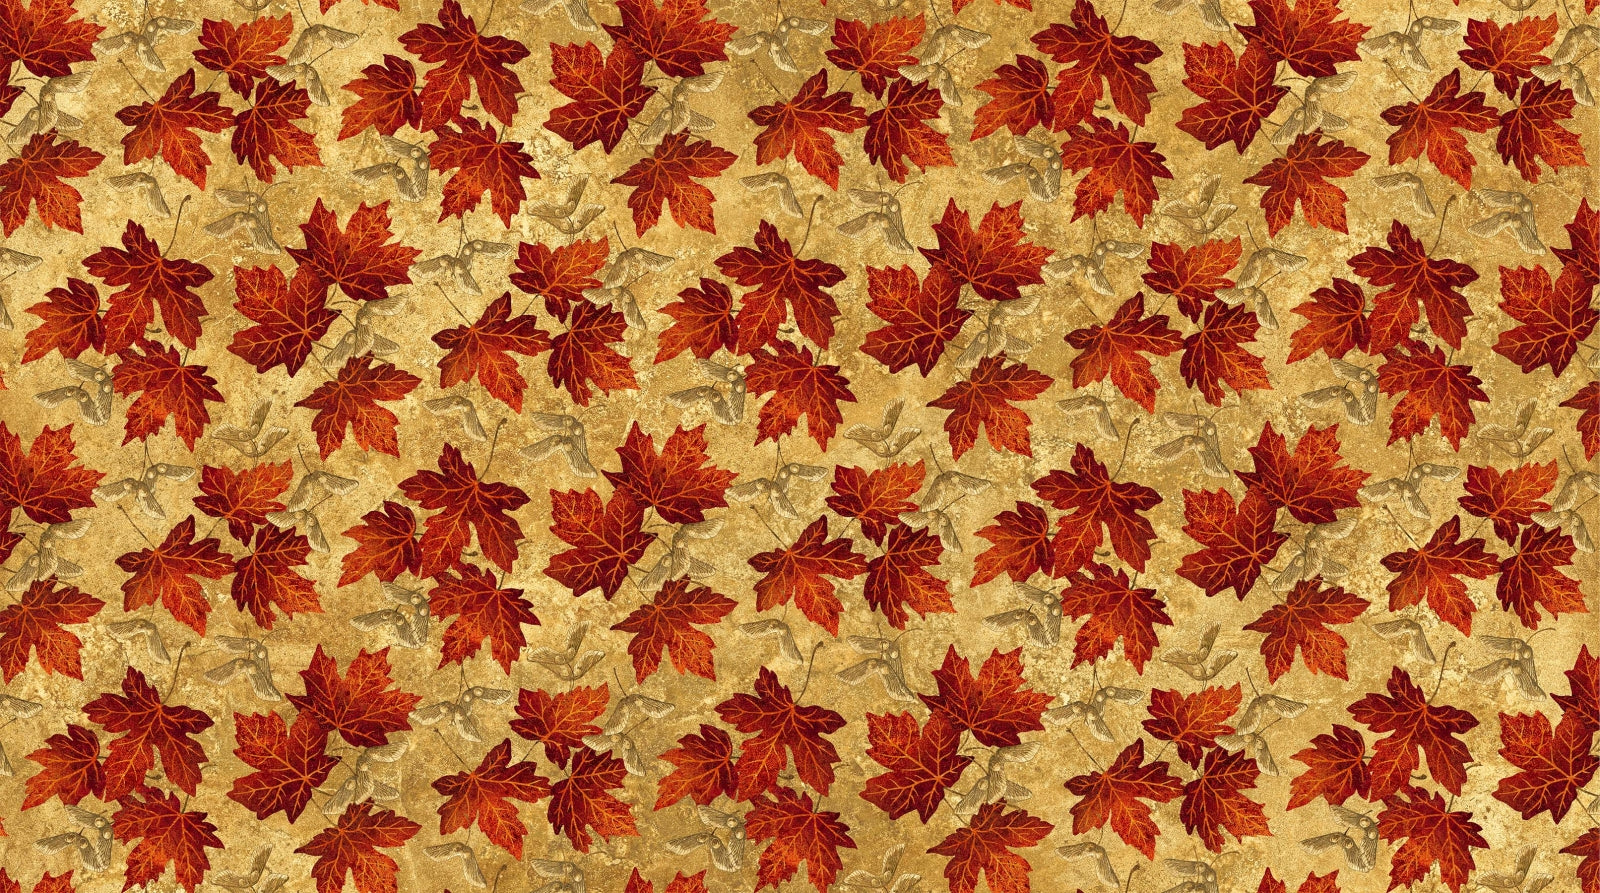 Maplewood - Leaves - Red on Gold